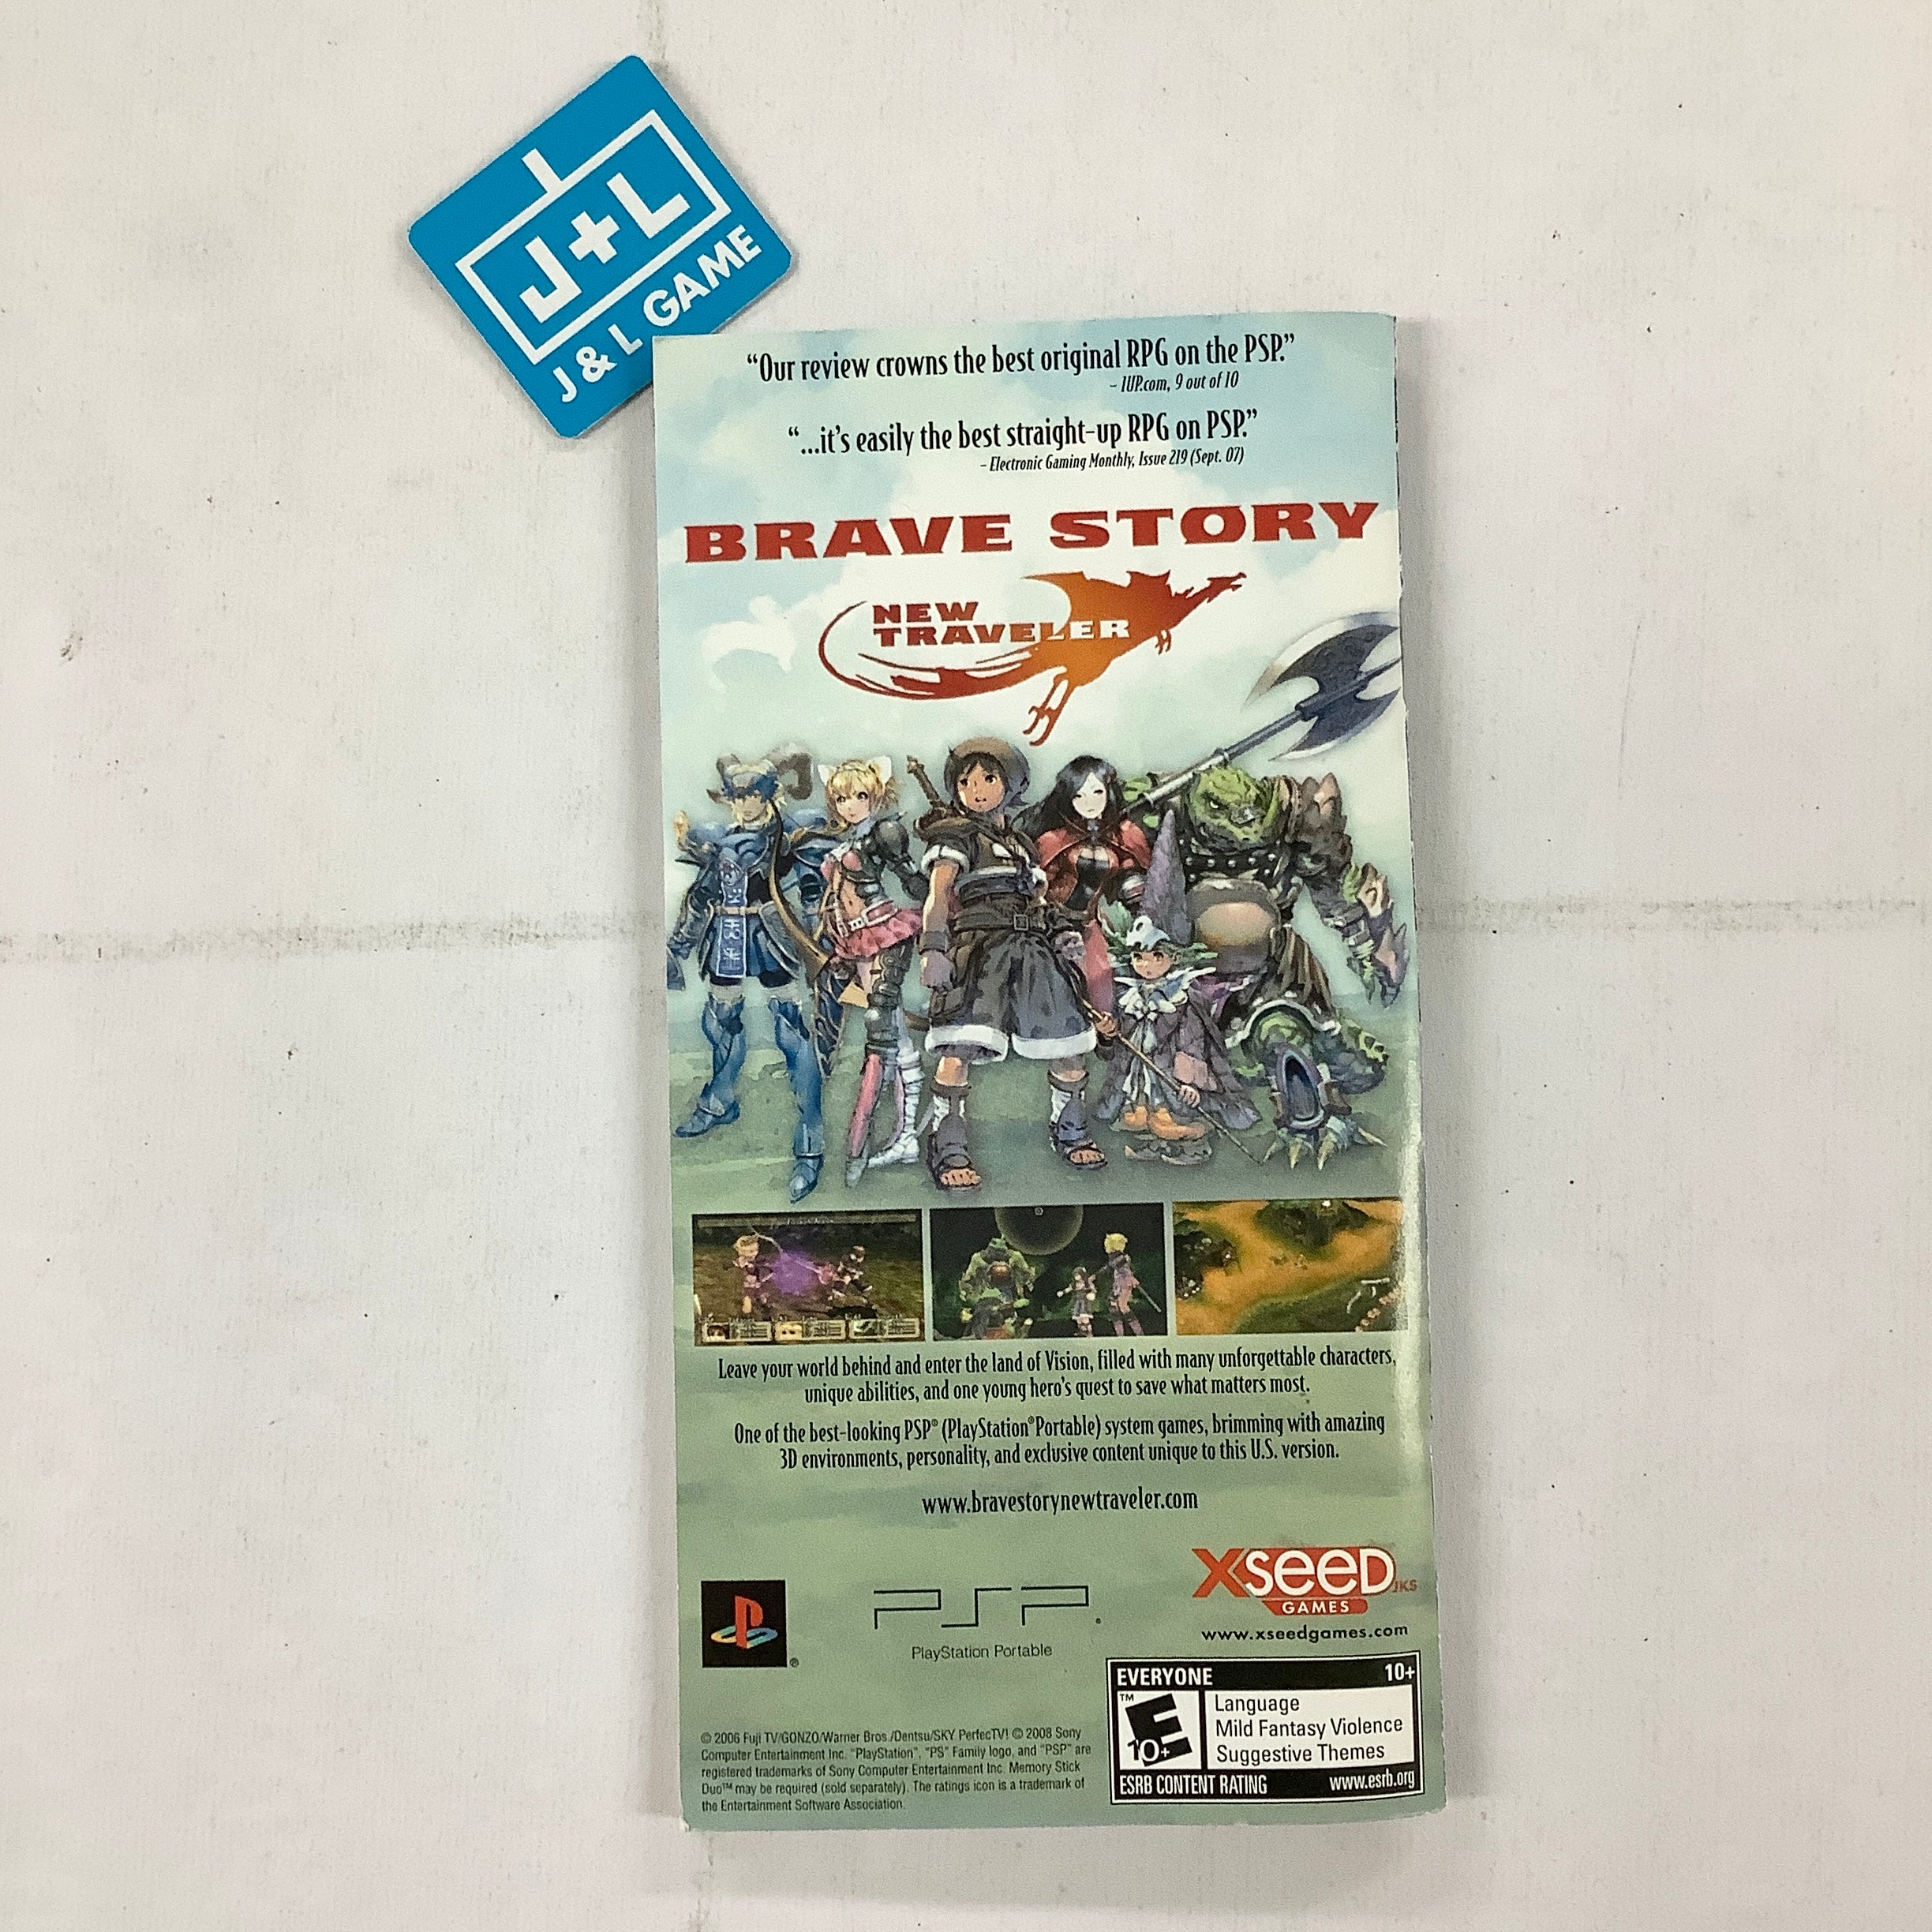 Wild ARMs XF - Sony PSP [Pre-Owned] Video Games XSEED Games   